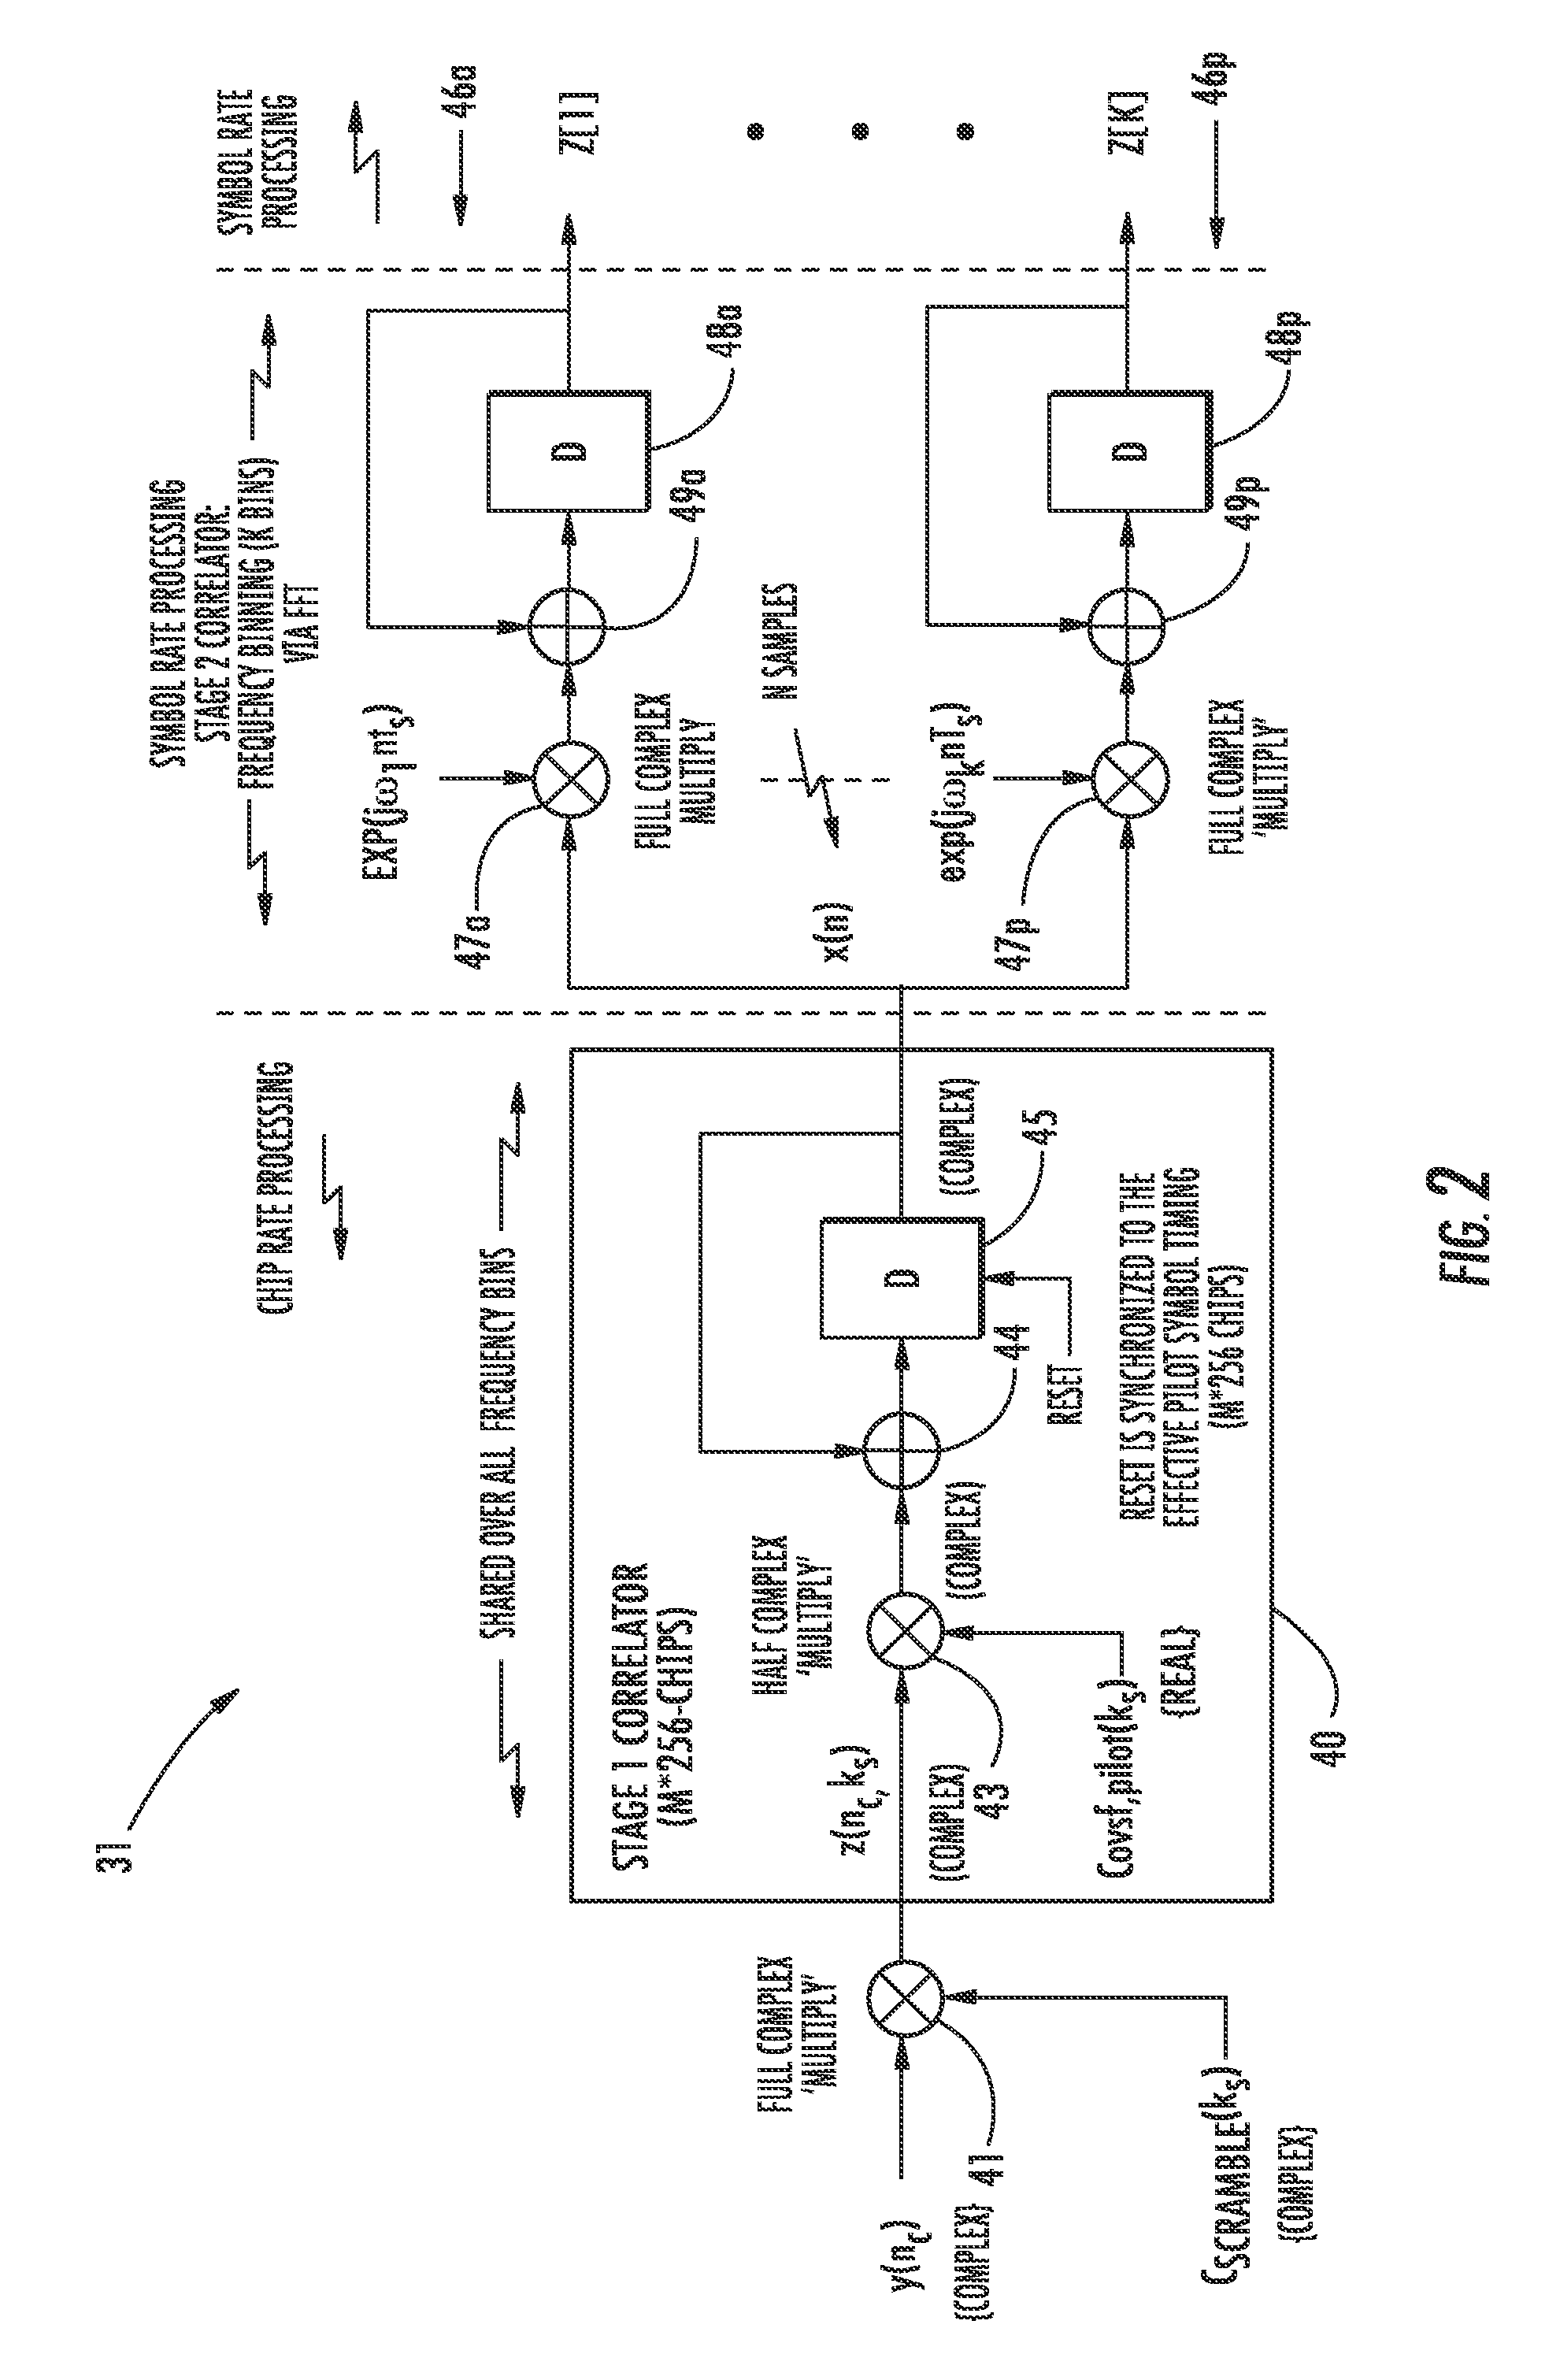 Wireless communications device including rake finger stage providing frequency correction and related methods